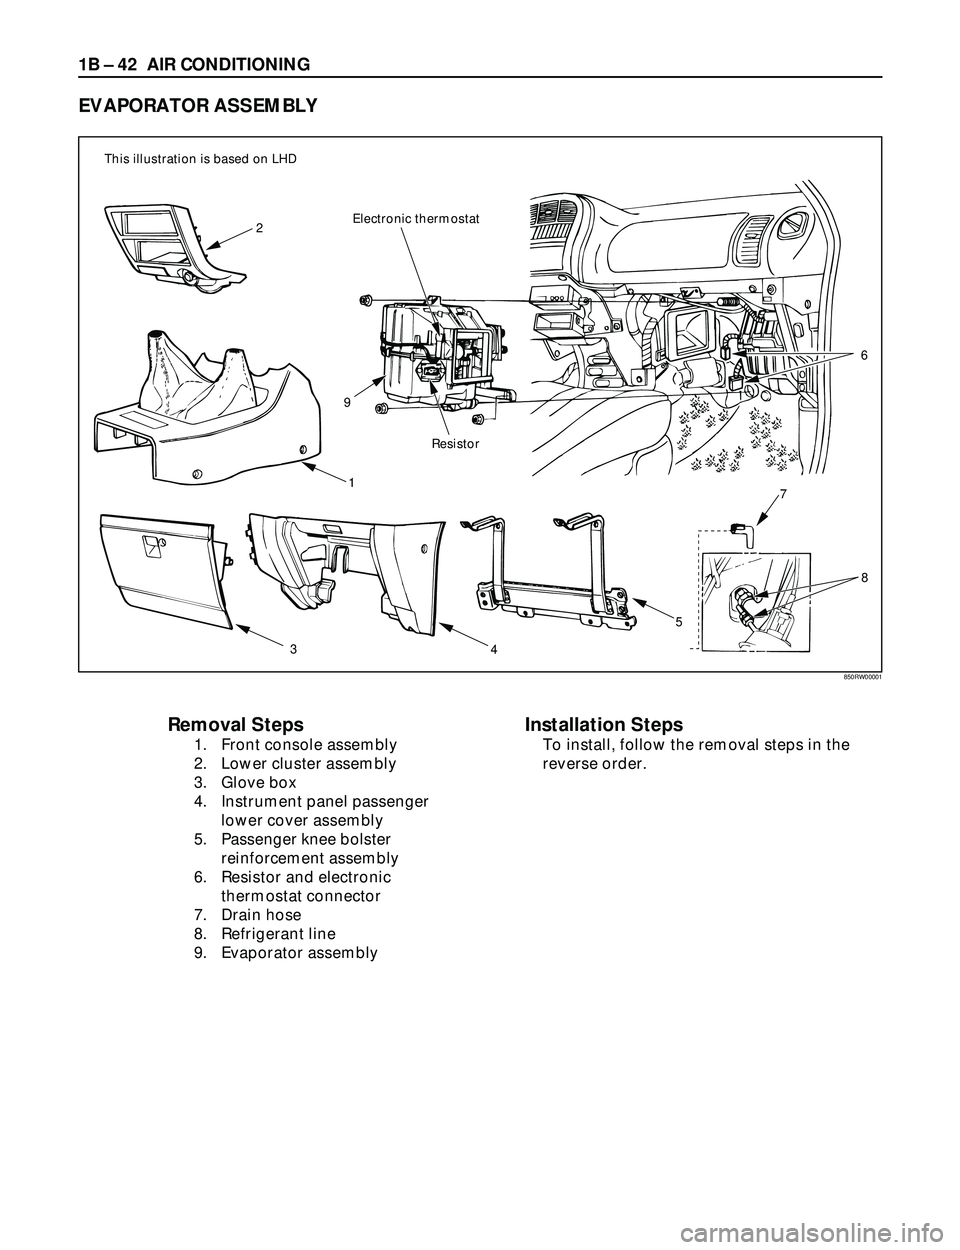 ISUZU TROOPER 1998  Service Repair Manual 1B Ð 42 AIR CONDITIONING
Removal Steps
1. Front console assembly
2. Lower cluster assembly
3. Glove box
4. Instrument panel passenger
lower cover assembly
5. Passenger knee bolster
reinforcement asse